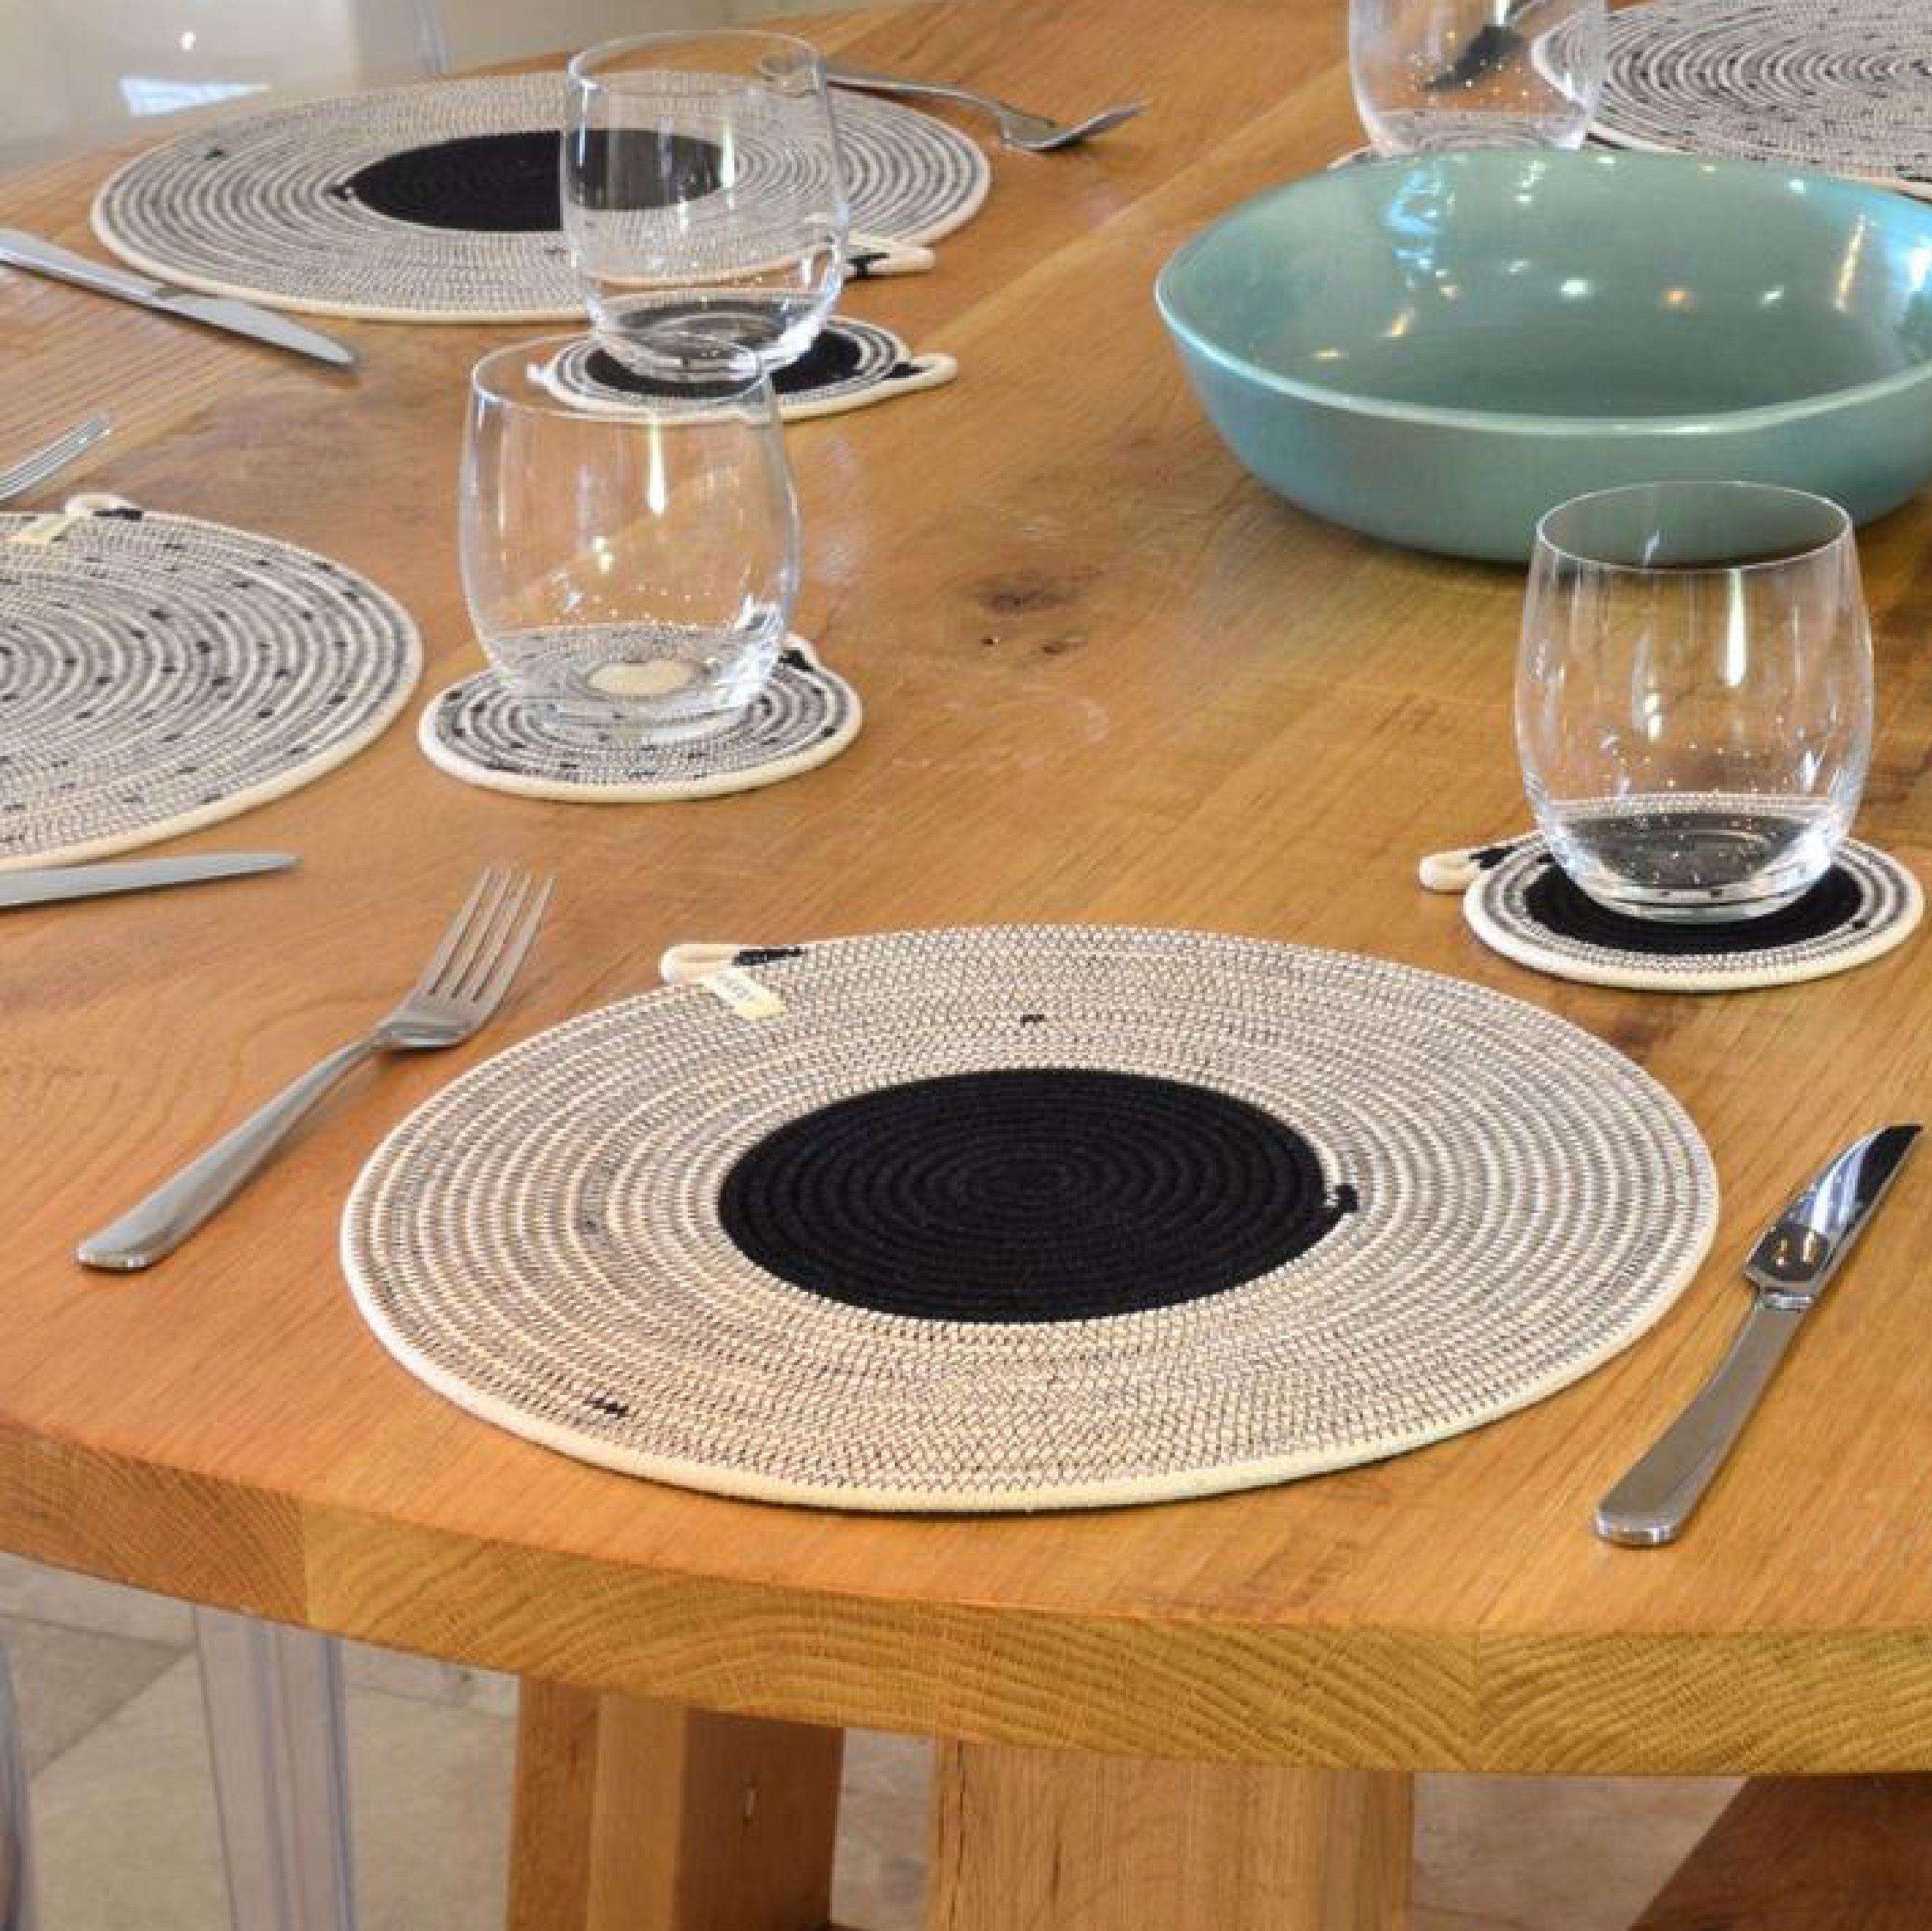 Placemats & Coasters Liquorice (set of 4 each)